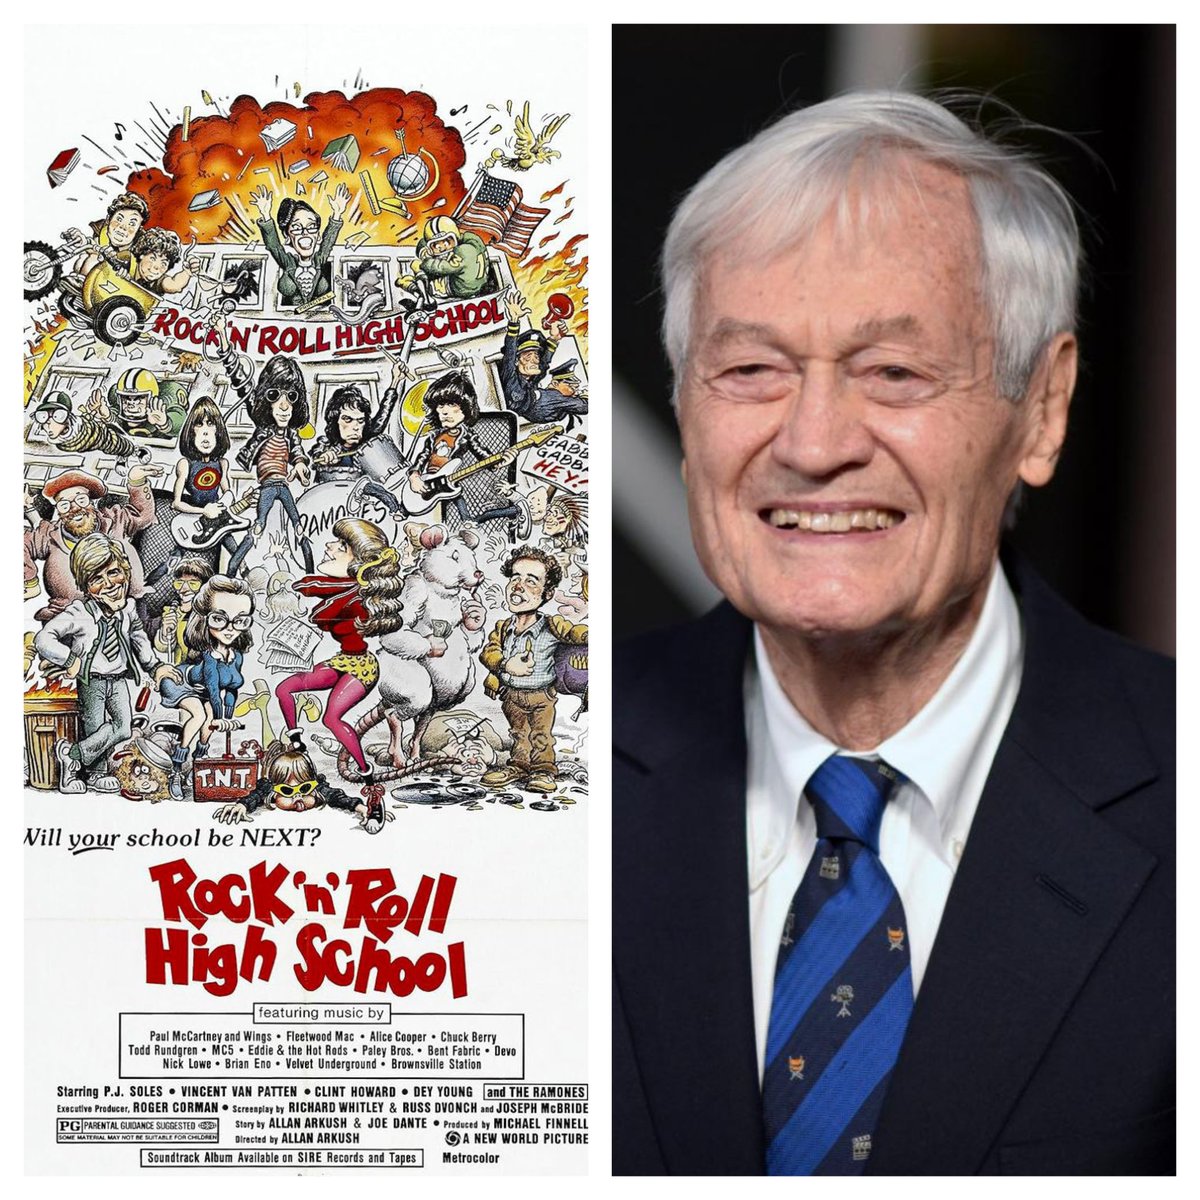 Next sad news The American director and producer Roger Corman is dead. He died on May 9, at the age of 98, his family confirmed. Corman produced the still popular 1979 film Rock 'n' Roll High School with music by the Ramones, Alice Cooper, Fleetwood Mac and Devo #RipRogerCorman